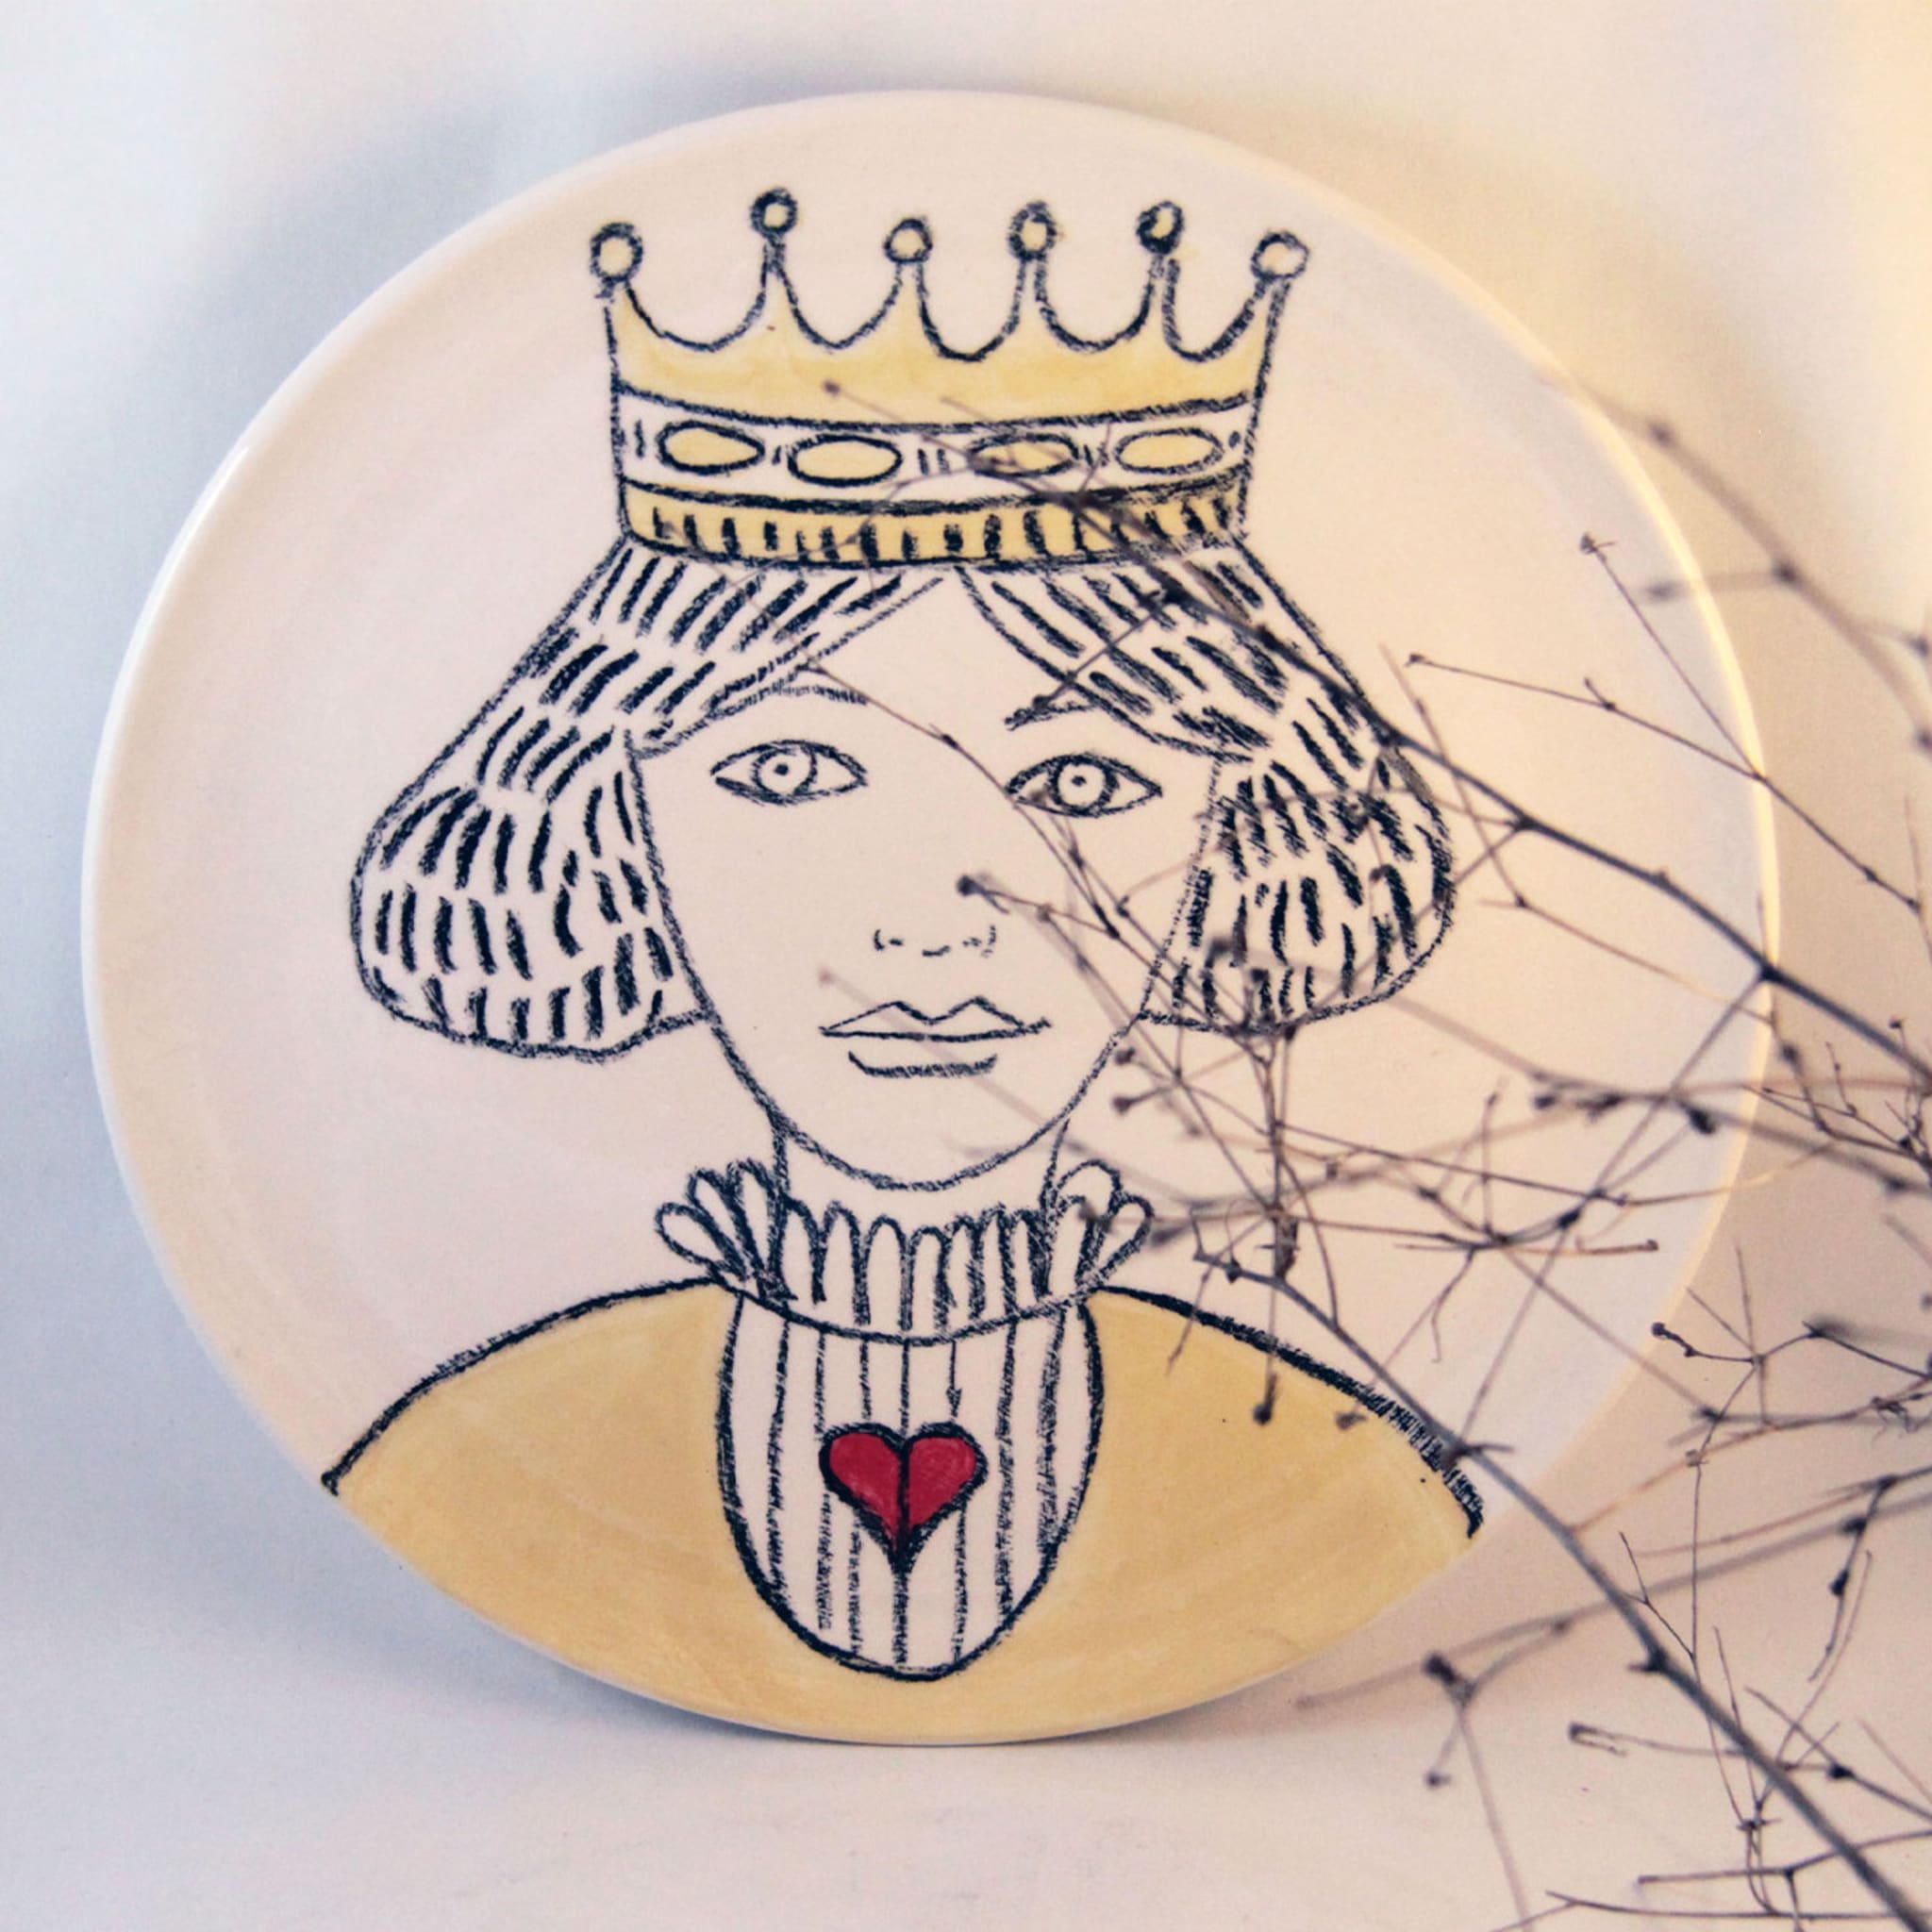 Queen of Hearts Decorative Plate - Alternative view 1